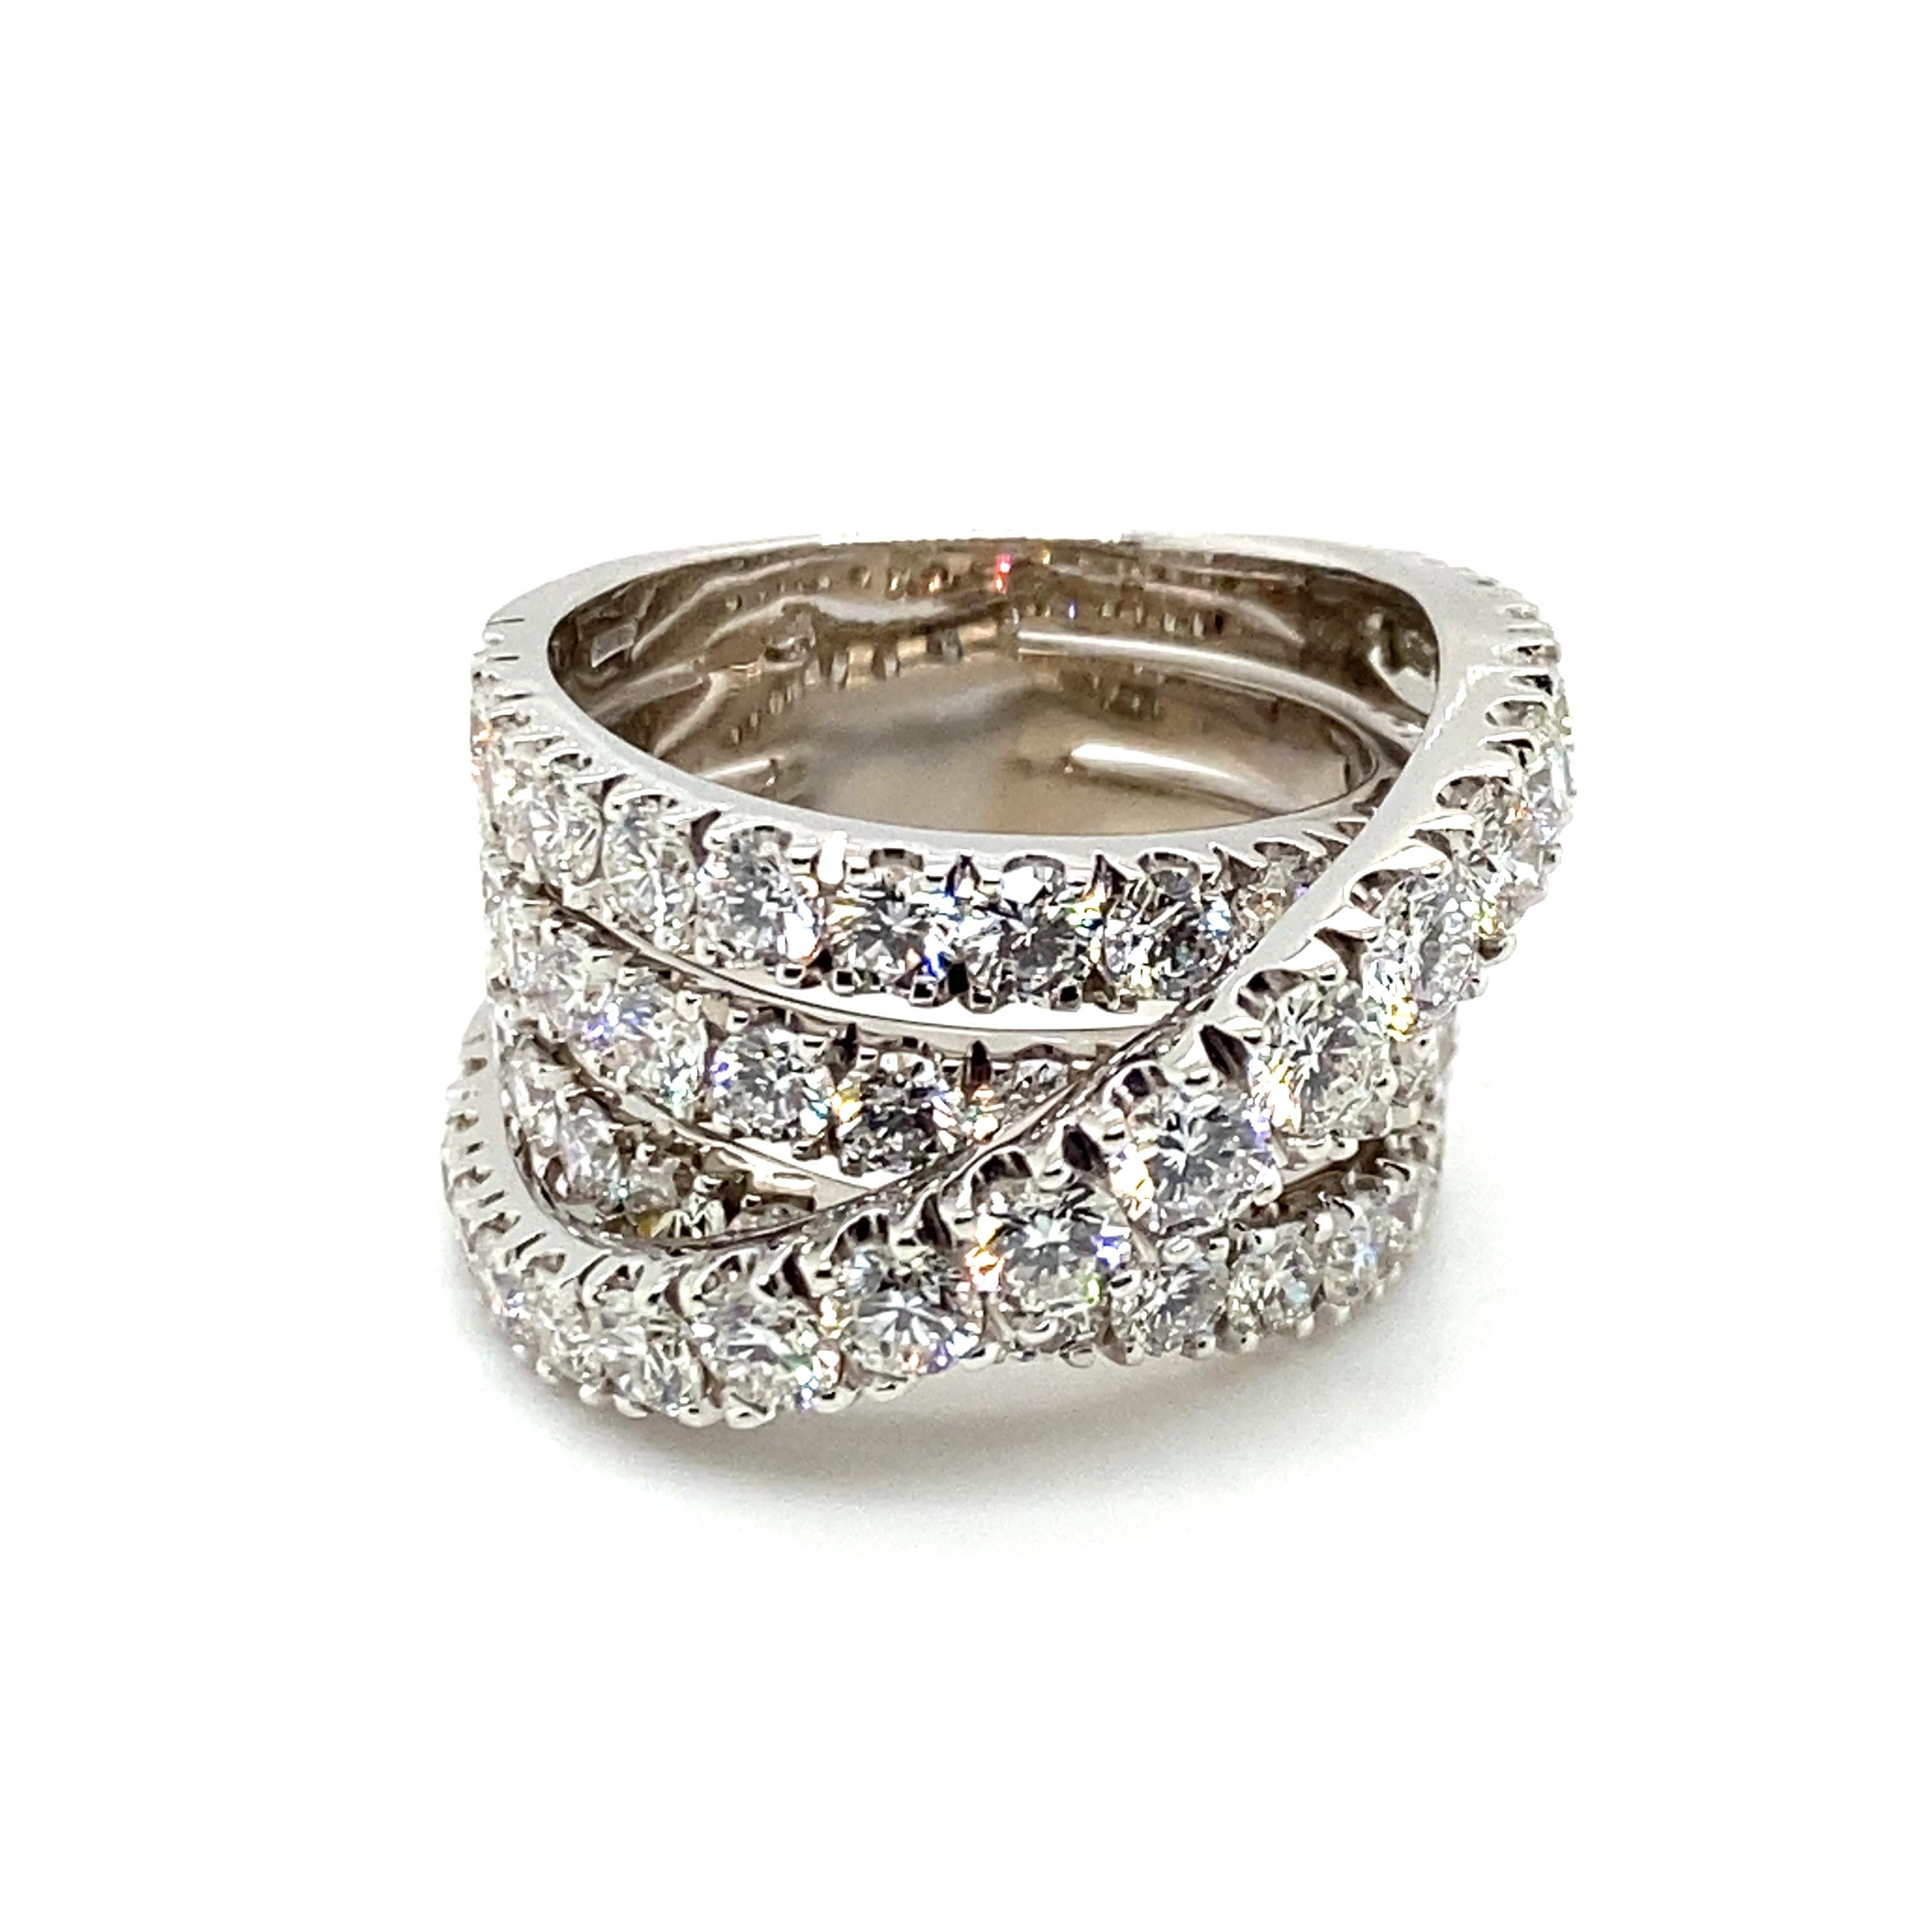 Super Sparkling Diamond Ring by Crivelli in 18 Karat White Gold For Sale 2